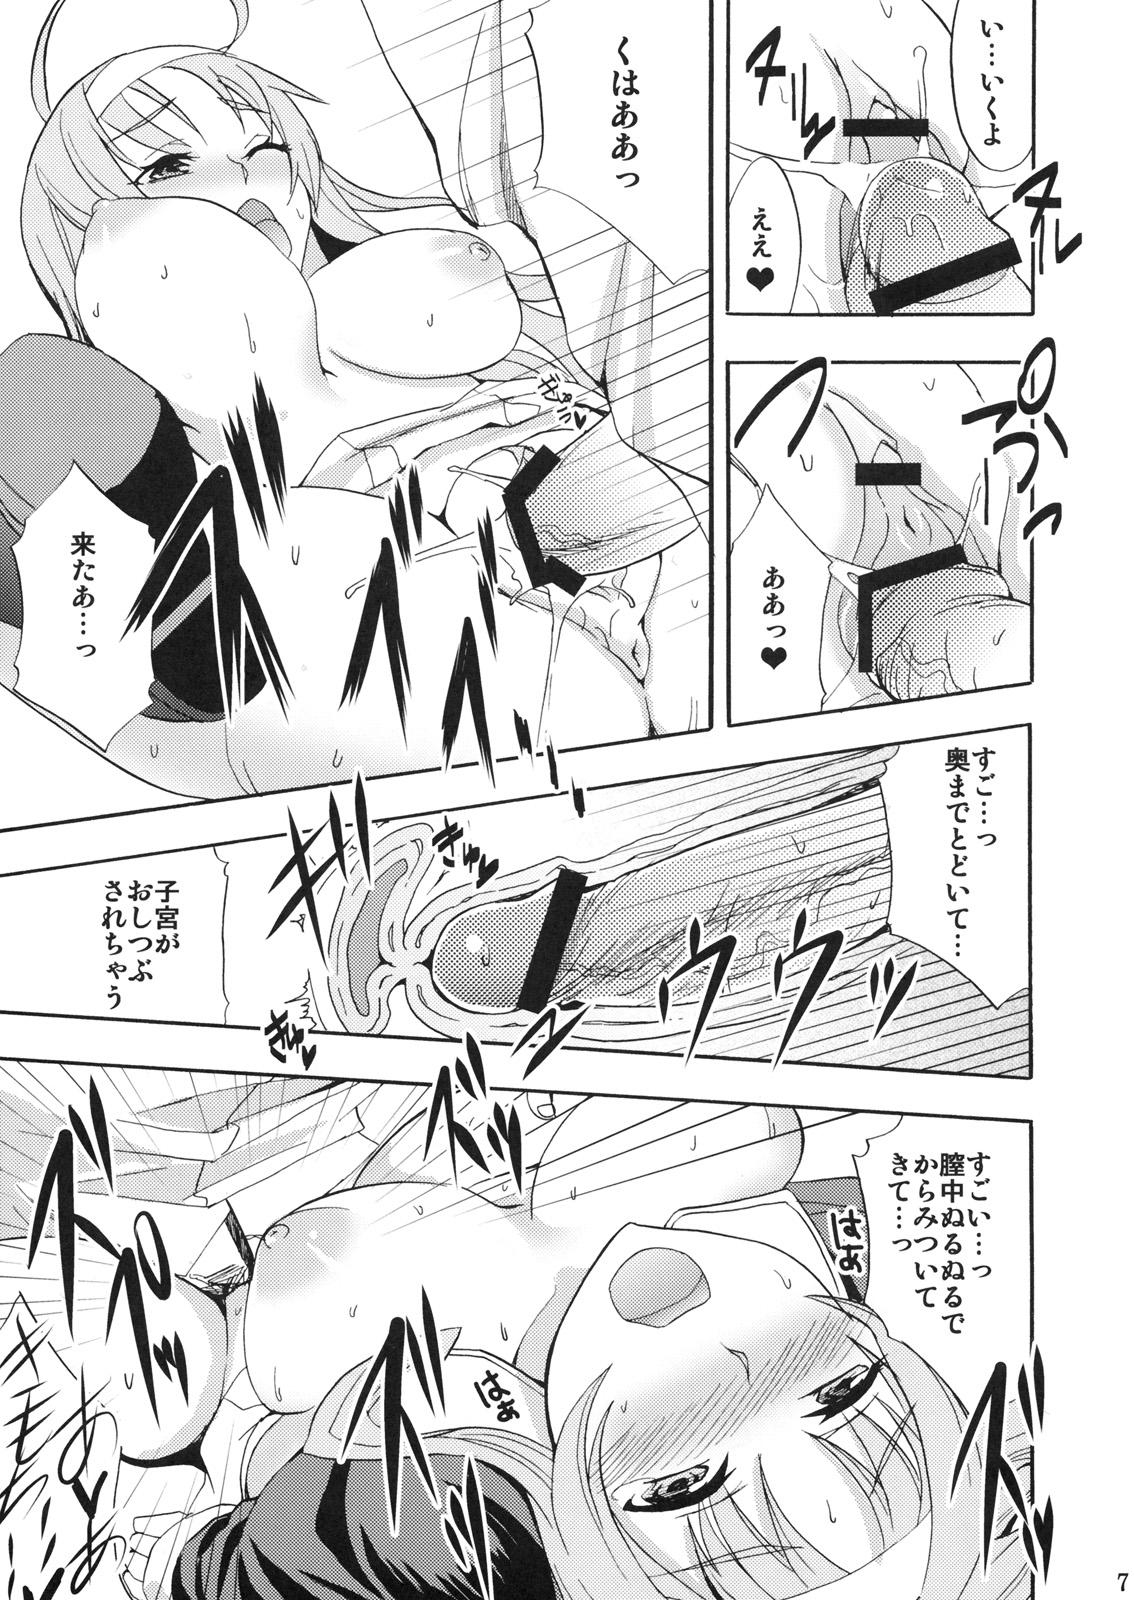 Ass To Mouth Glass Goshi Kiss - Star driver Negao - Page 6